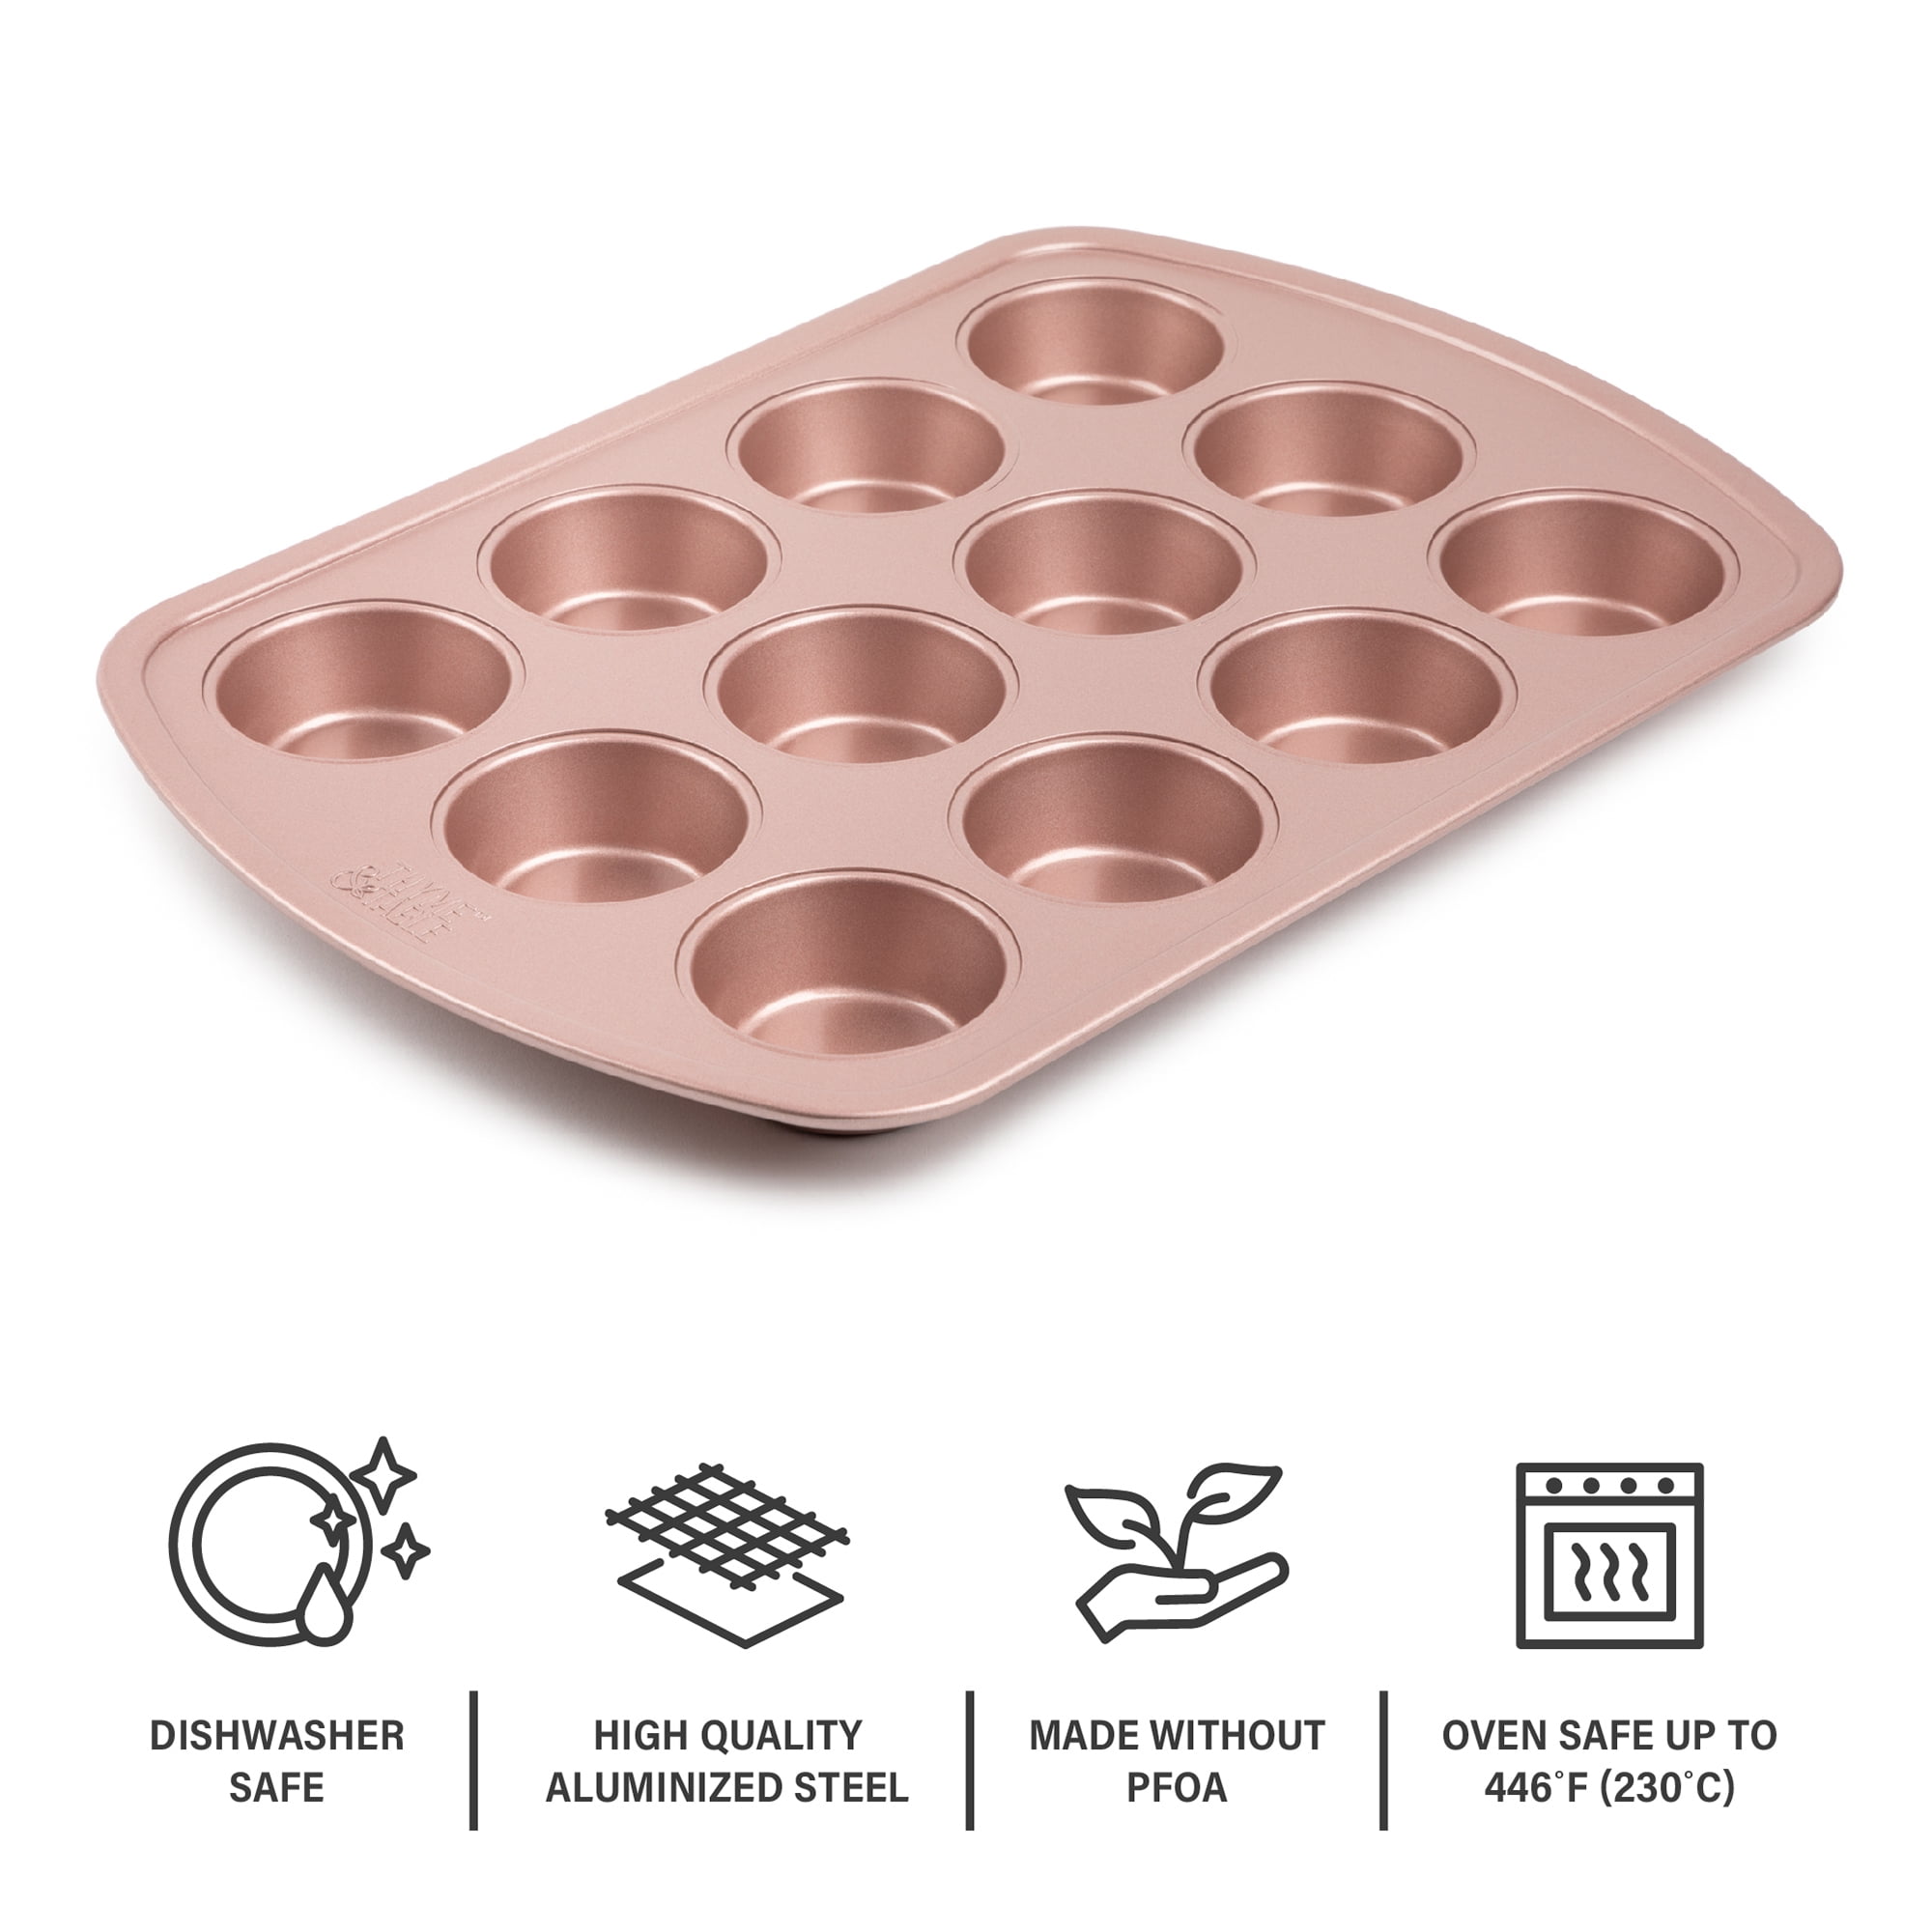 HONGBAKE Mini Loaf Pan for Baking Bread, Nonstick Small Banana Bread Tins  Set of 3, 6 x 3.3 x 2 In Tiny Carbon Steel Meatloaf Pan - Rose Gold